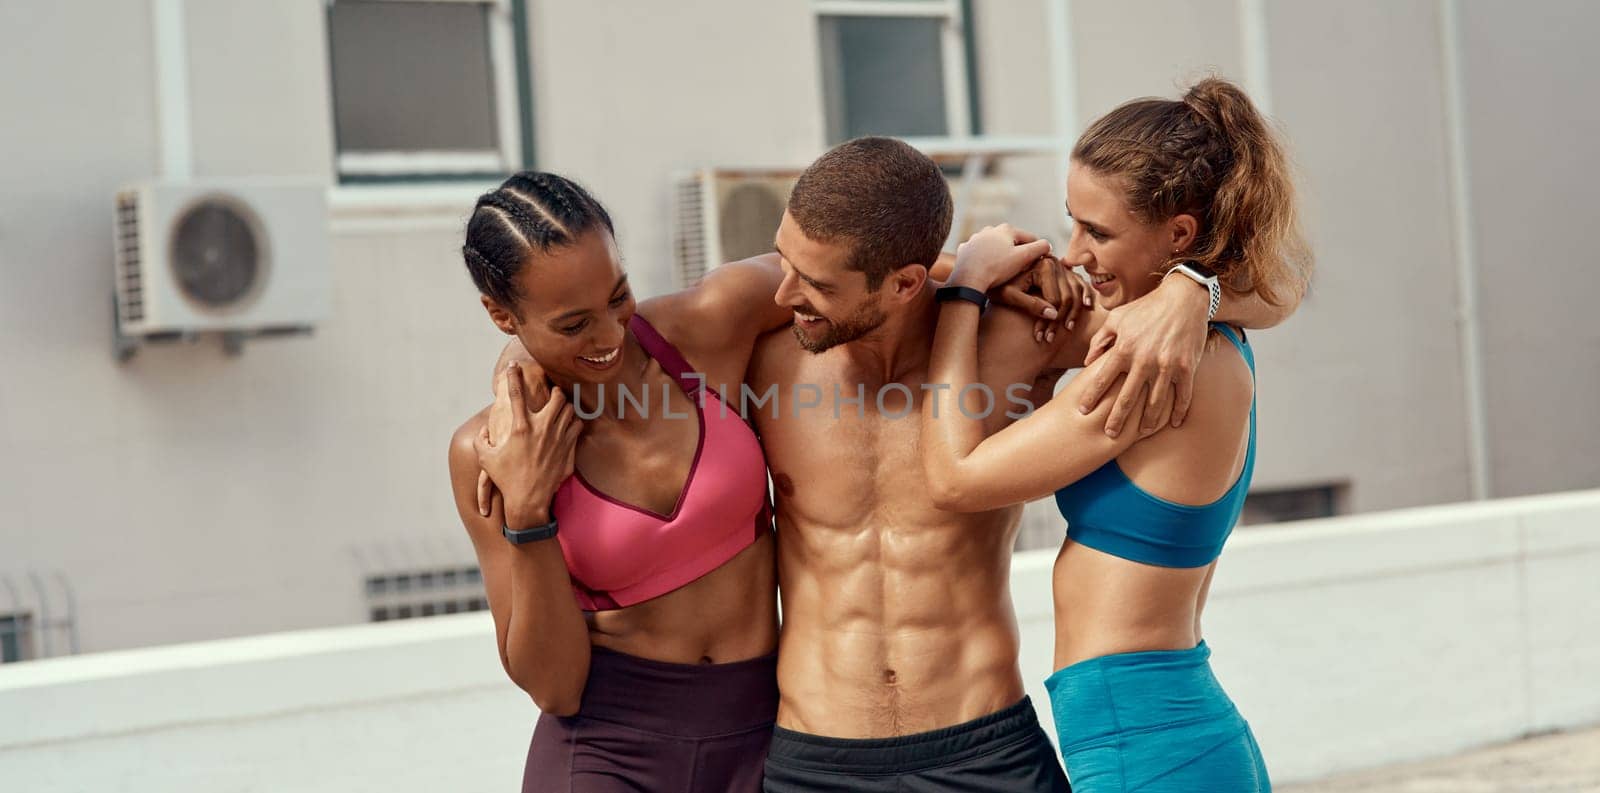 Now we know why working out together is better. a fitness group standing together while out for a workout